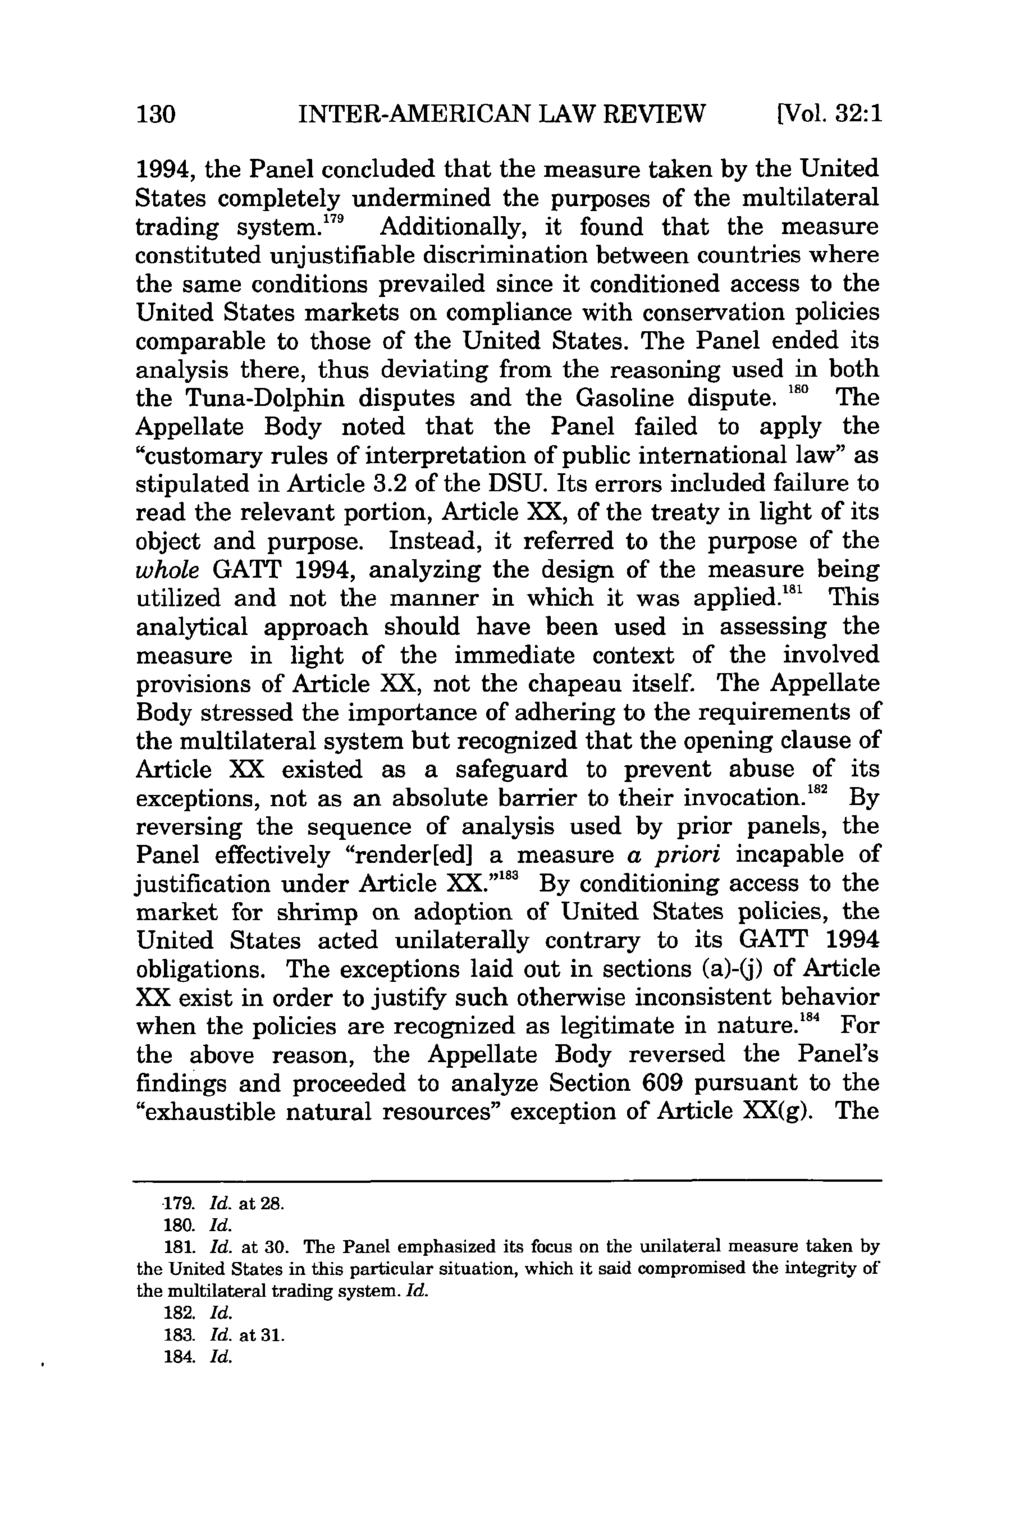 INTER-AMERICAN LAW REVIEW [Vol. 32:1 1994, the Panel concluded that the measure taken by the United States completely undermined the purposes of the multilateral trading system.